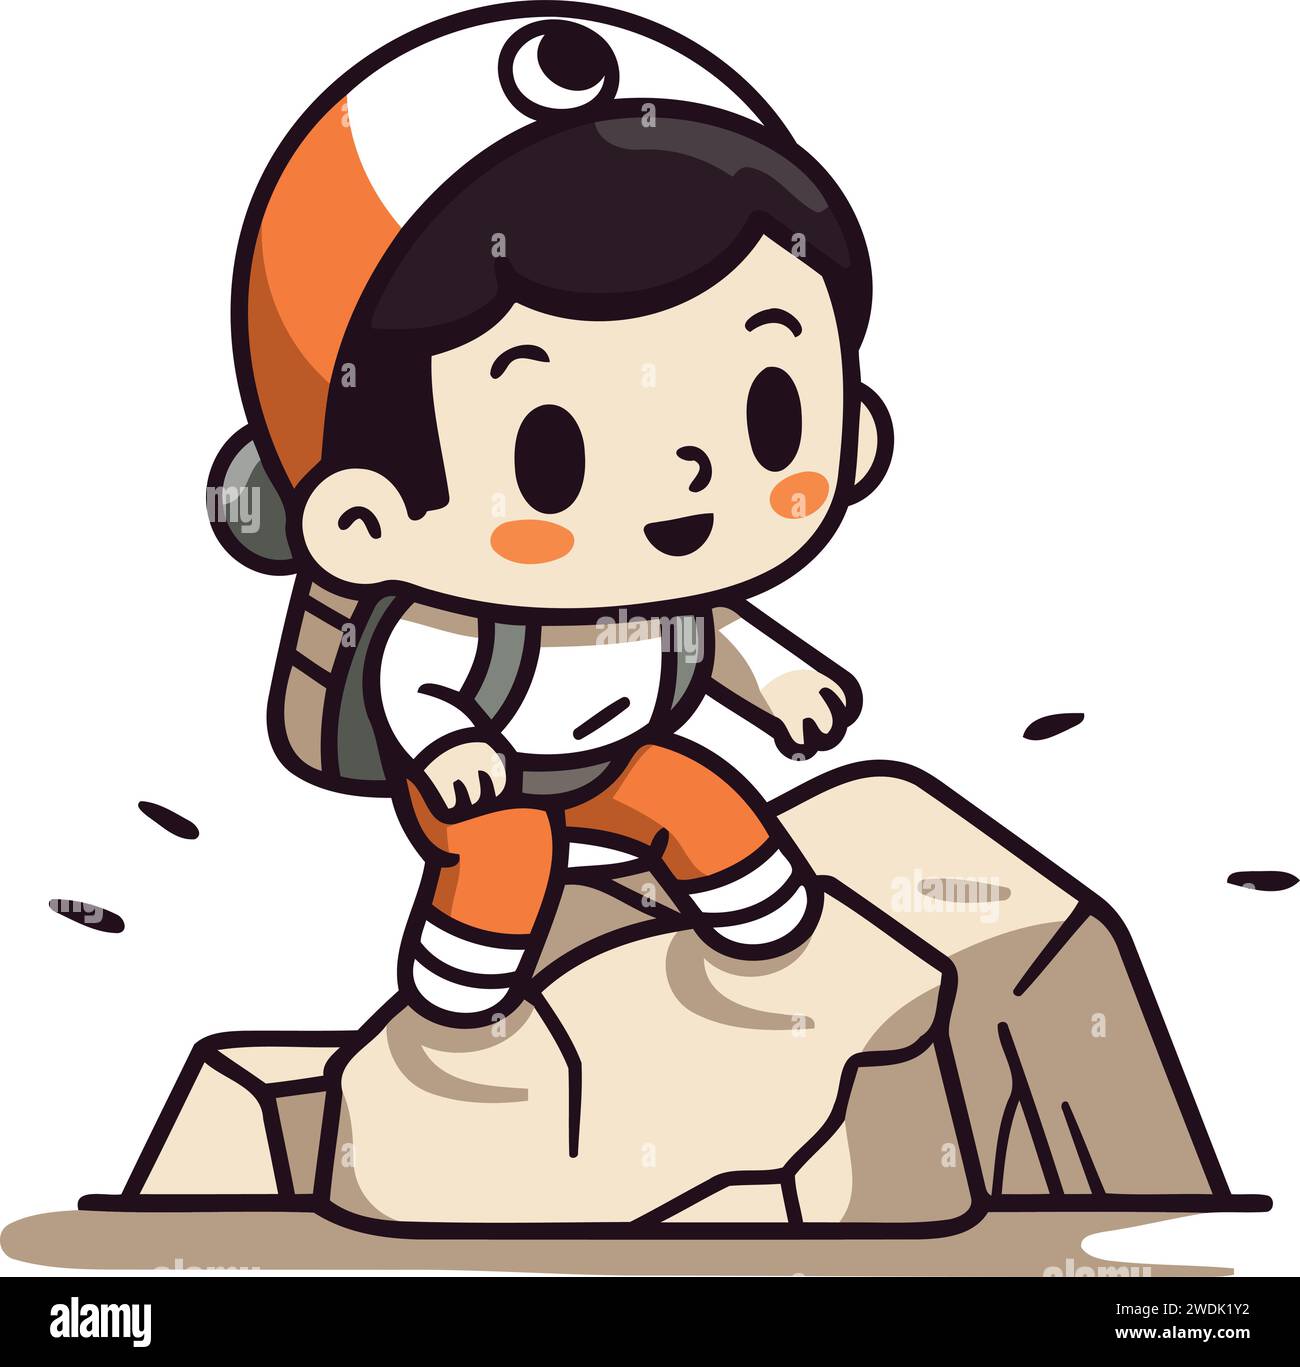 Cute boy climbing on a rock. Vector illustration in a flat style. Stock Vector